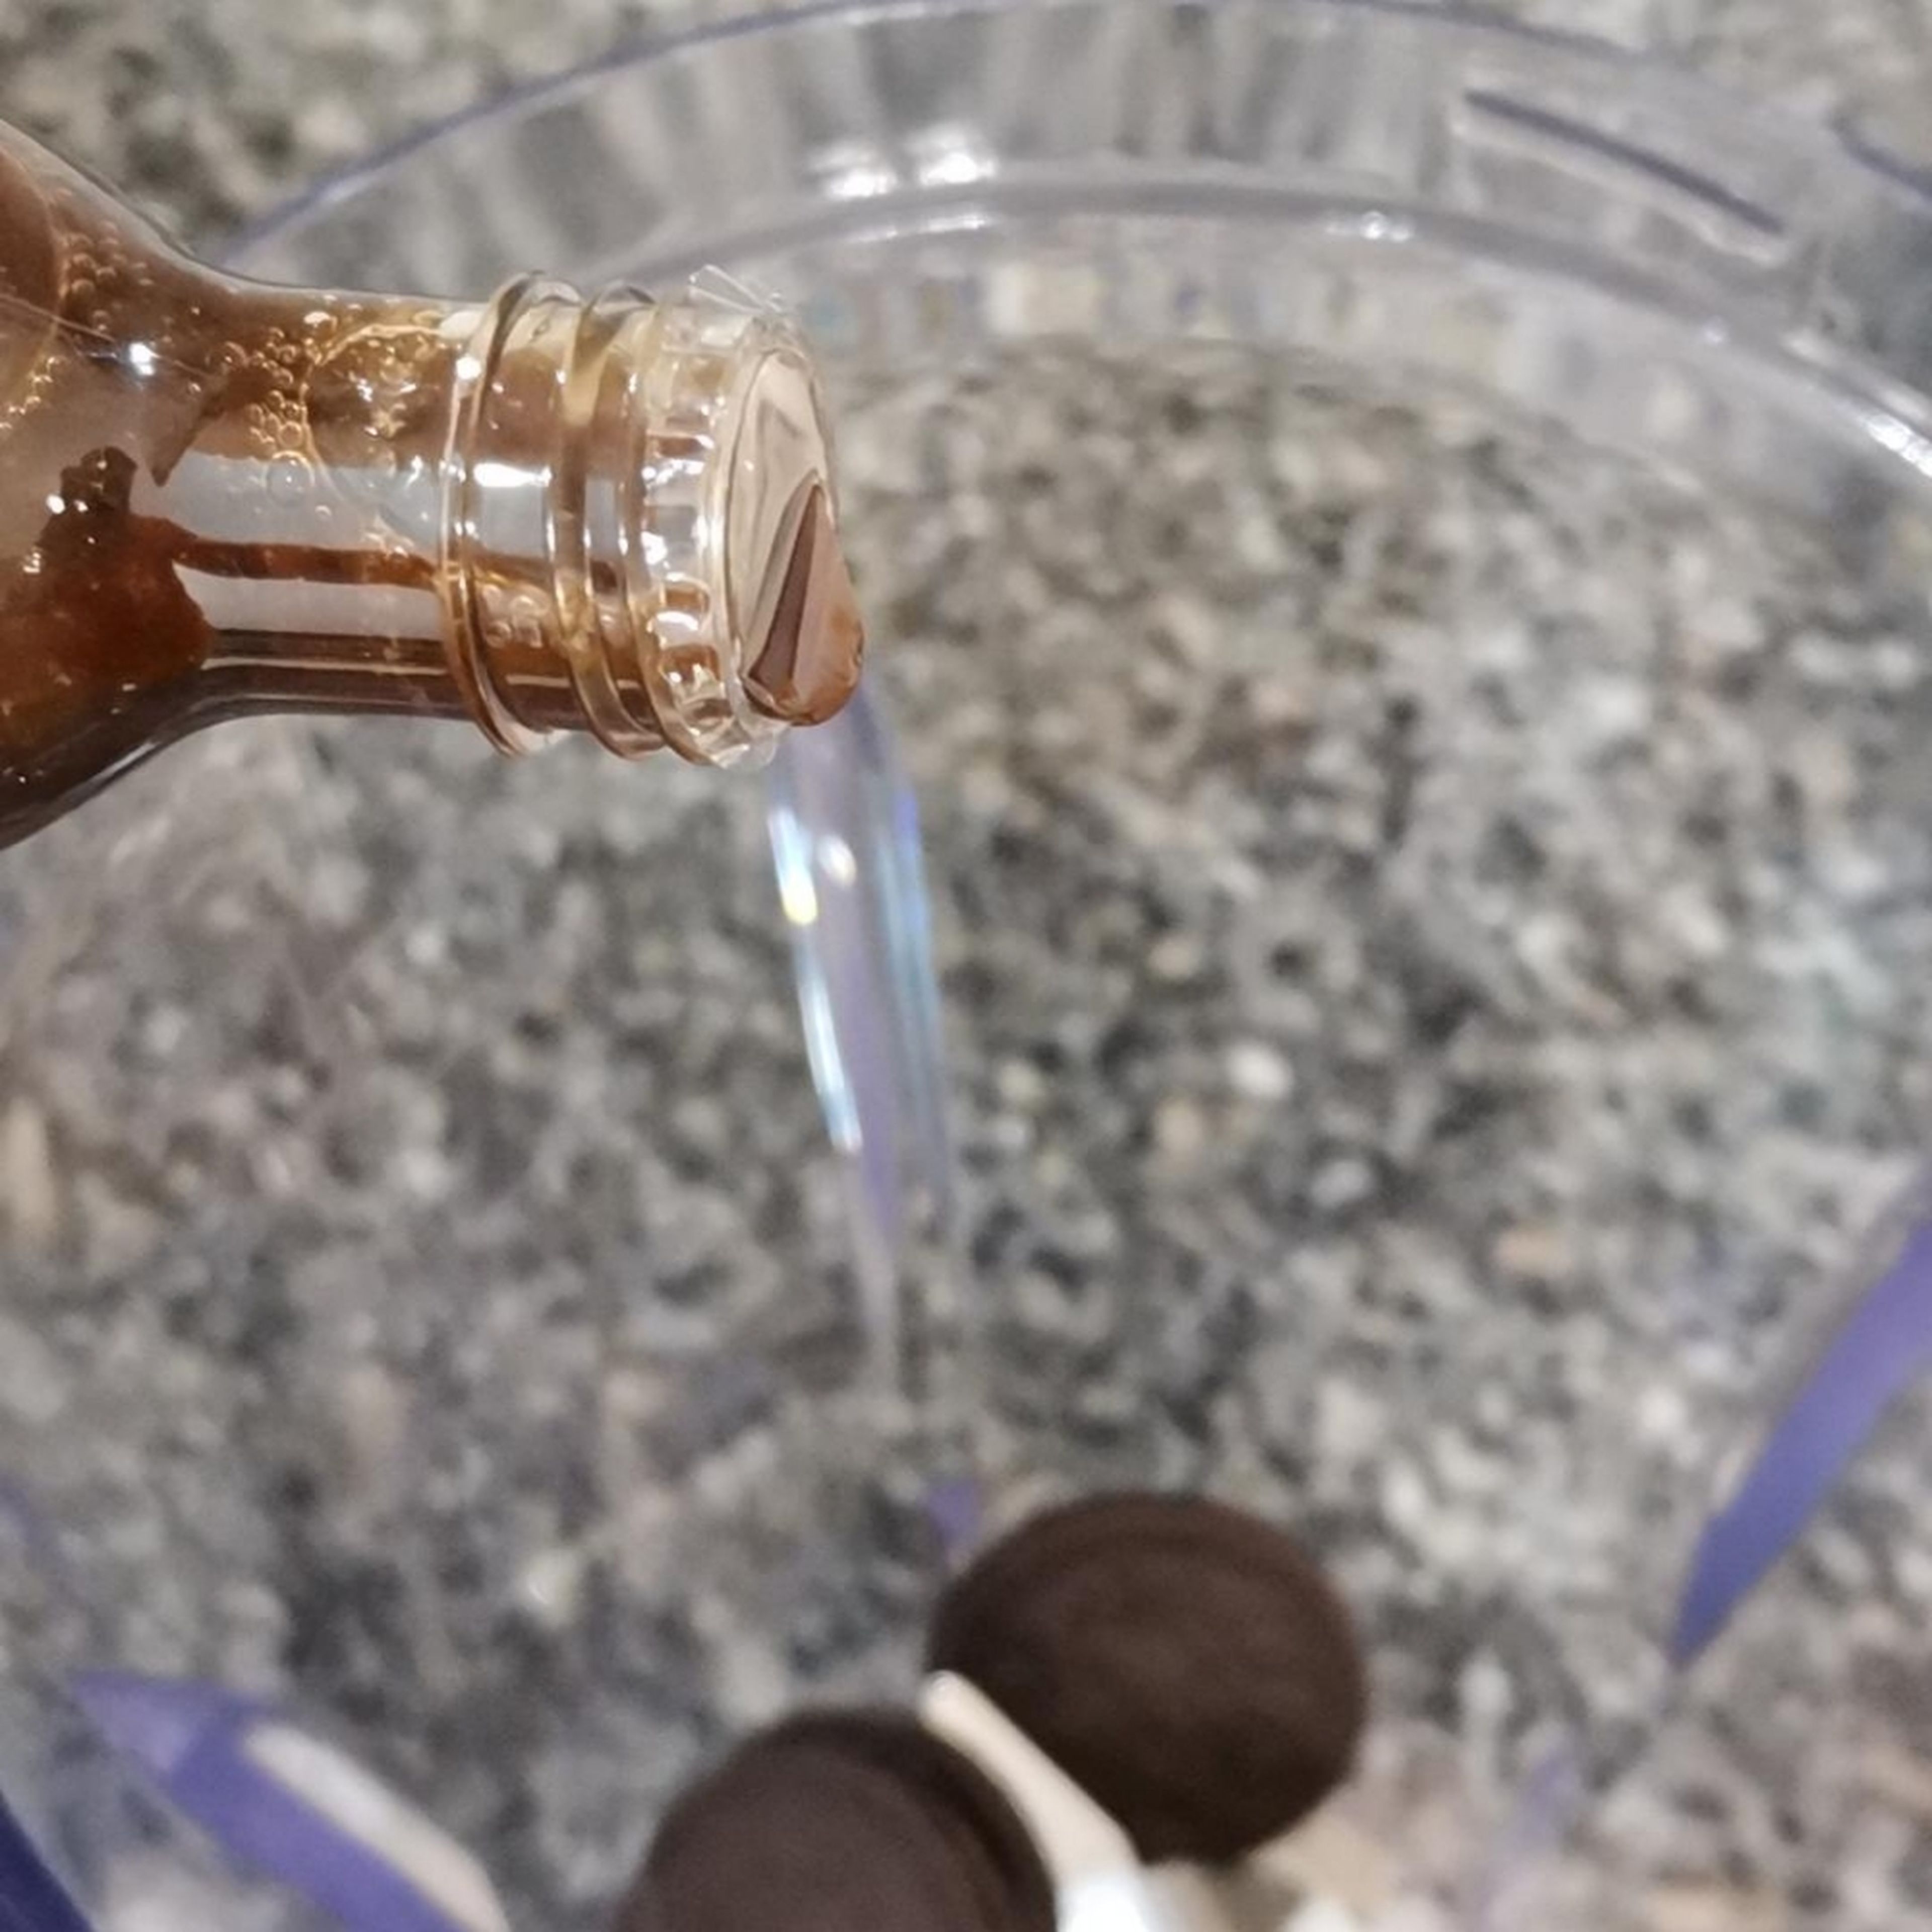 Add 2-3  dashes of vanilla extract